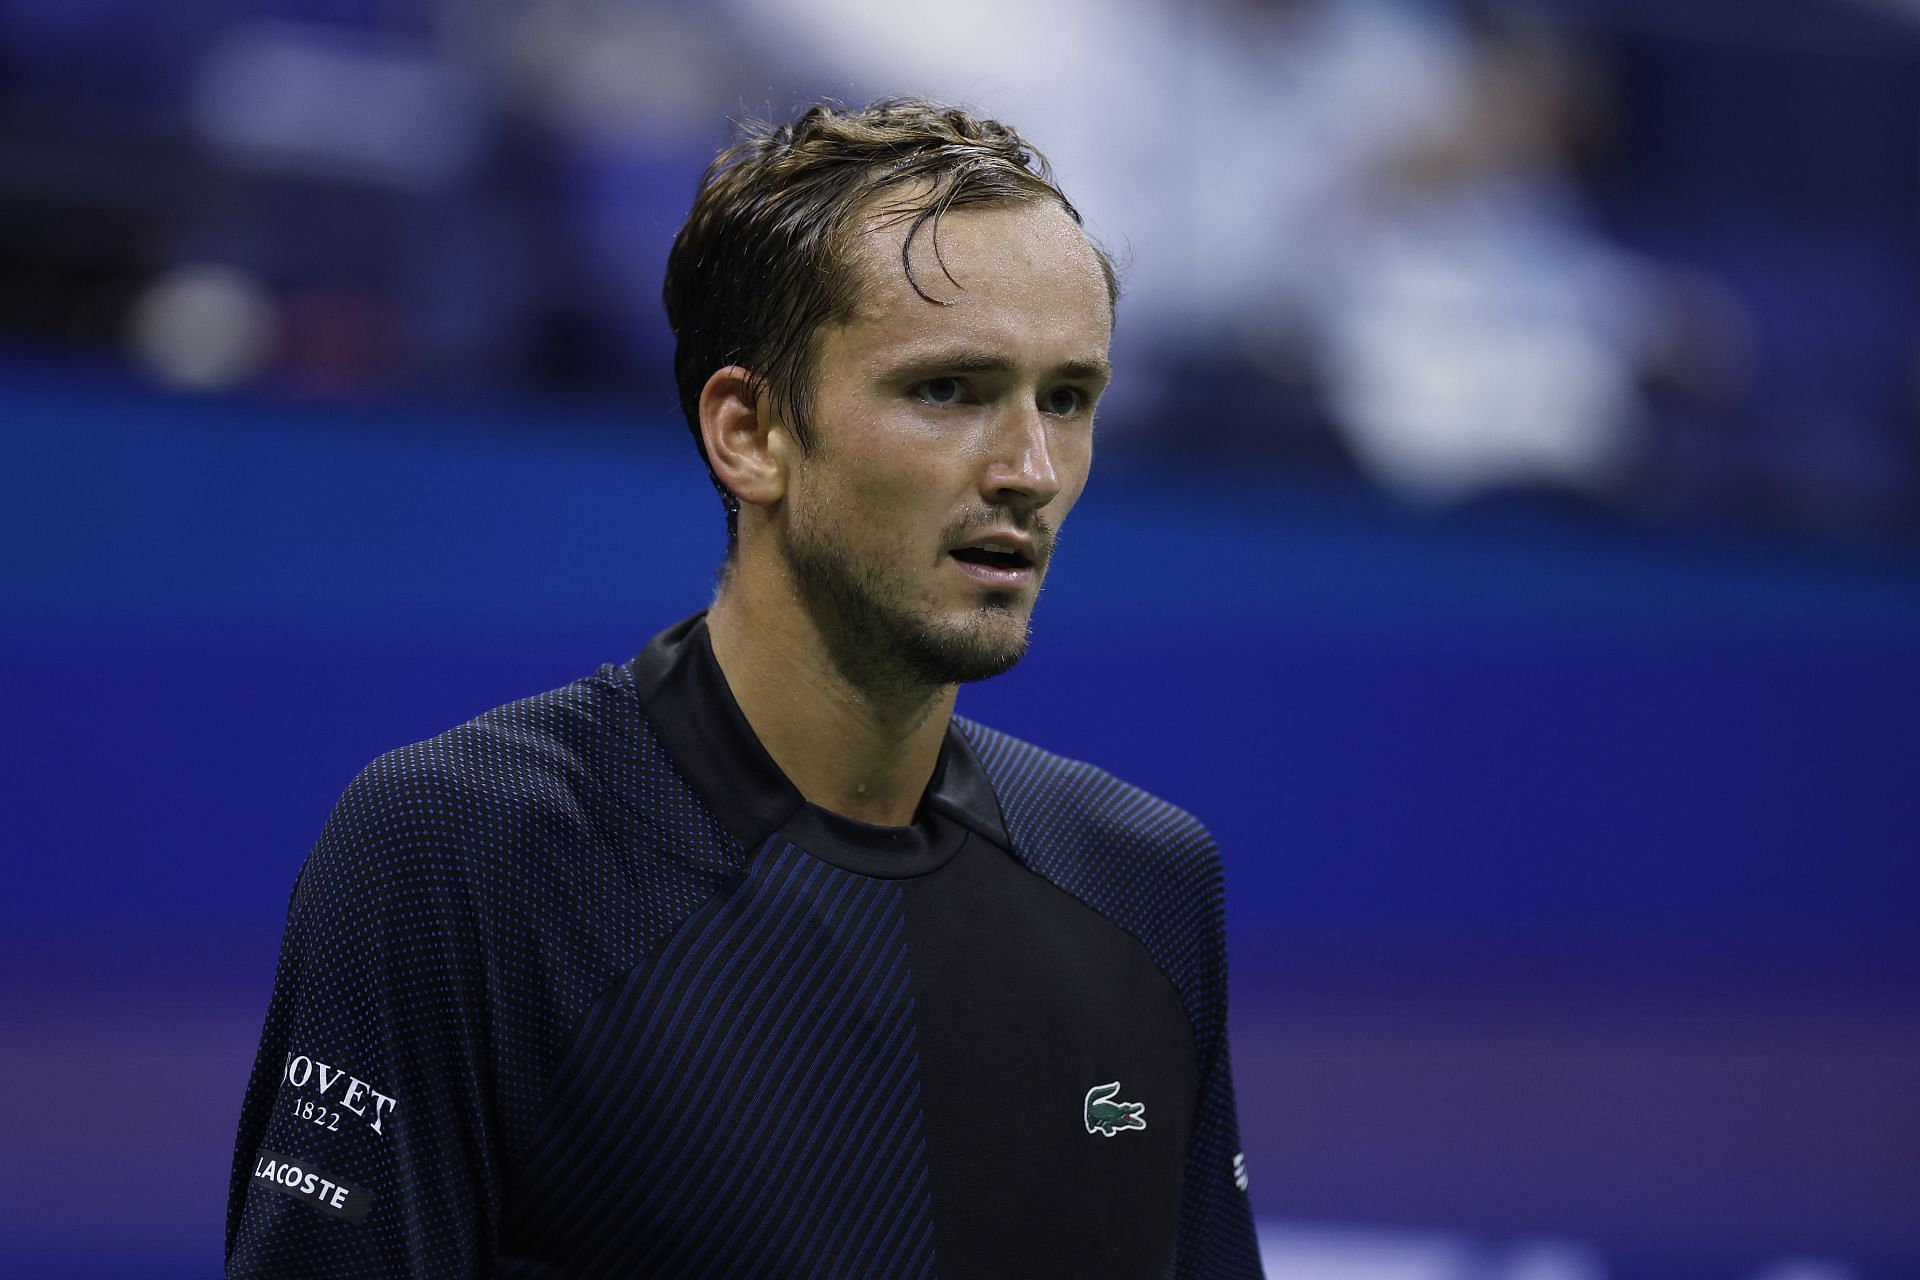 Daniil Medvedev at the 2022 US Open - Day 5